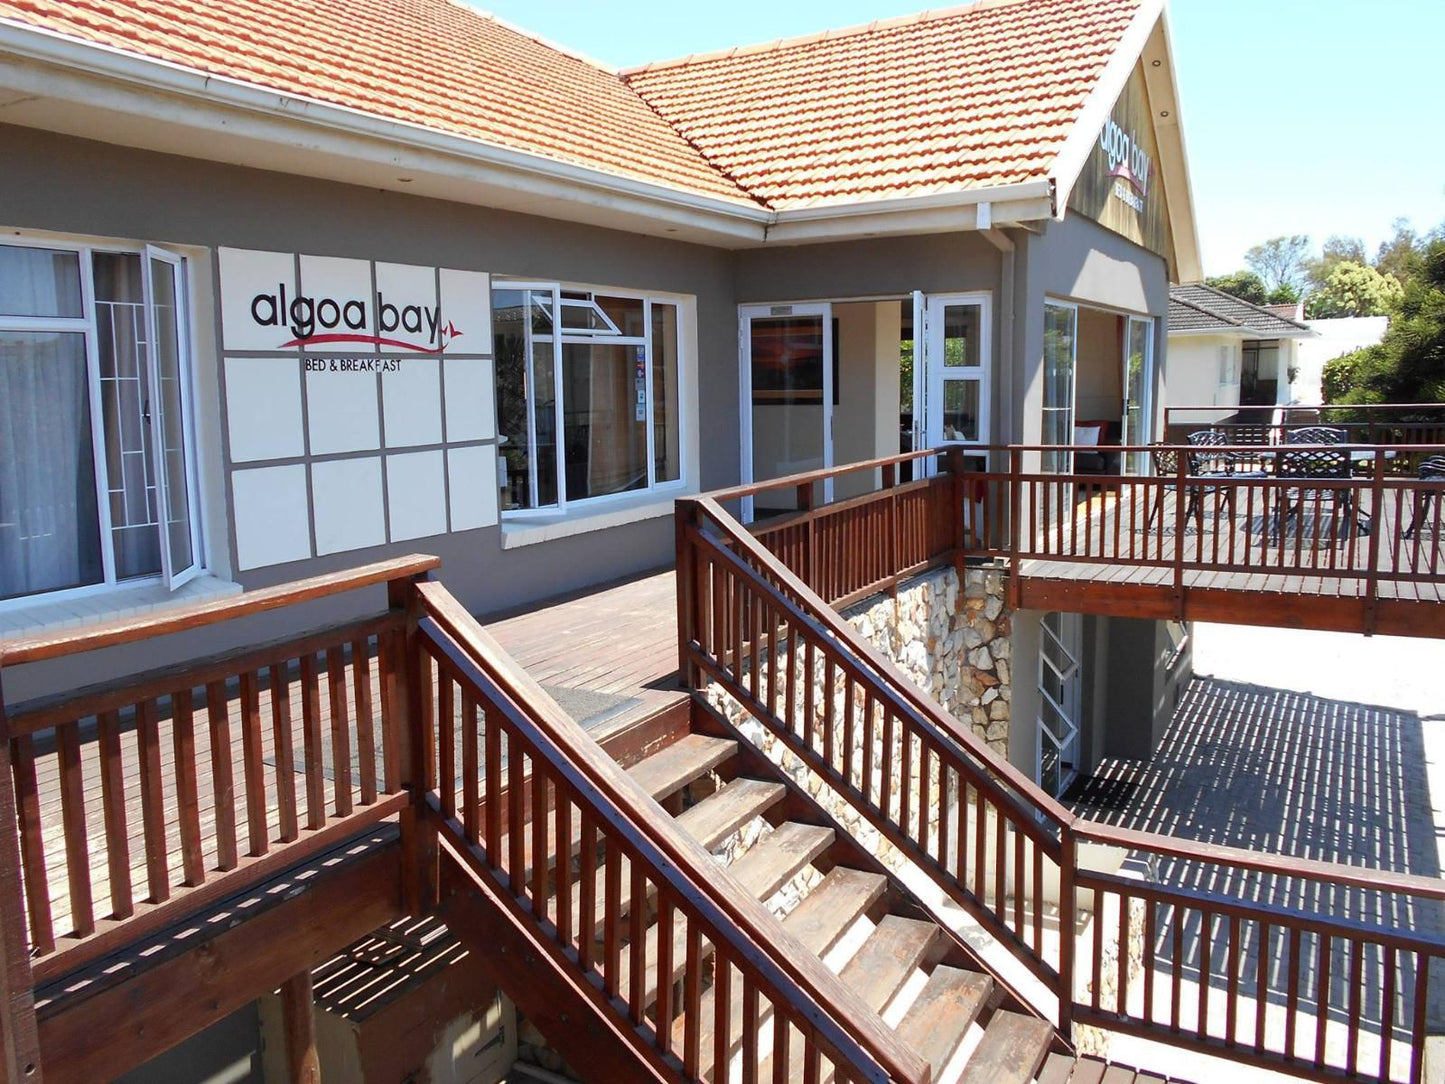 Algoa Bay Bed And Breakfast Humewood Port Elizabeth Eastern Cape South Africa House, Building, Architecture